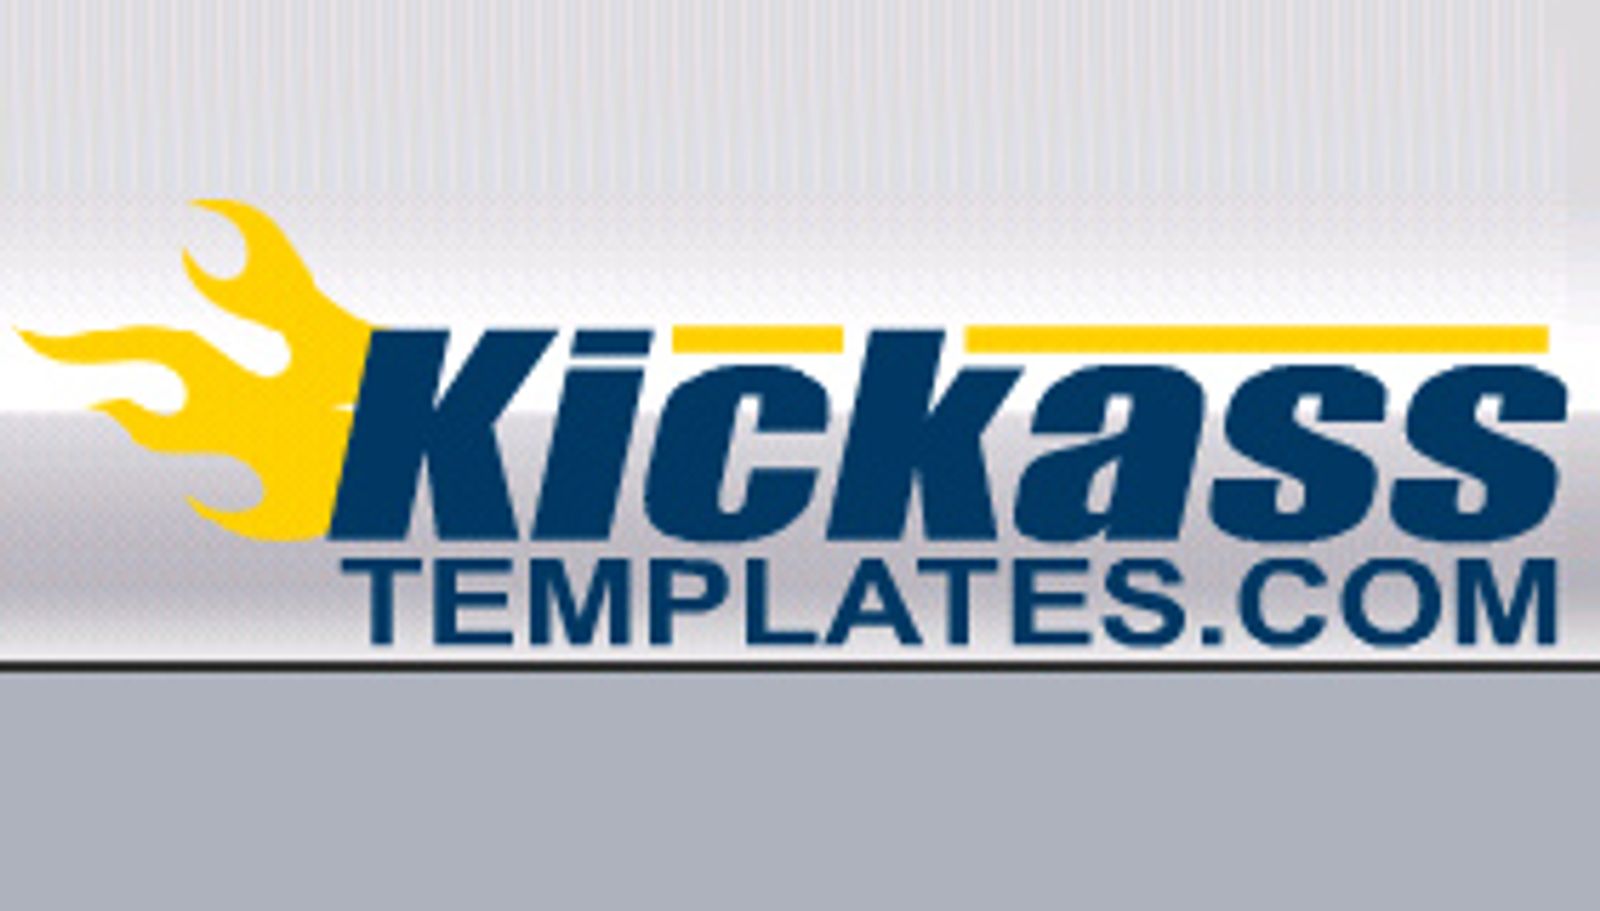 Buy Adult Content Launches KickAssTemplates.com With Specials